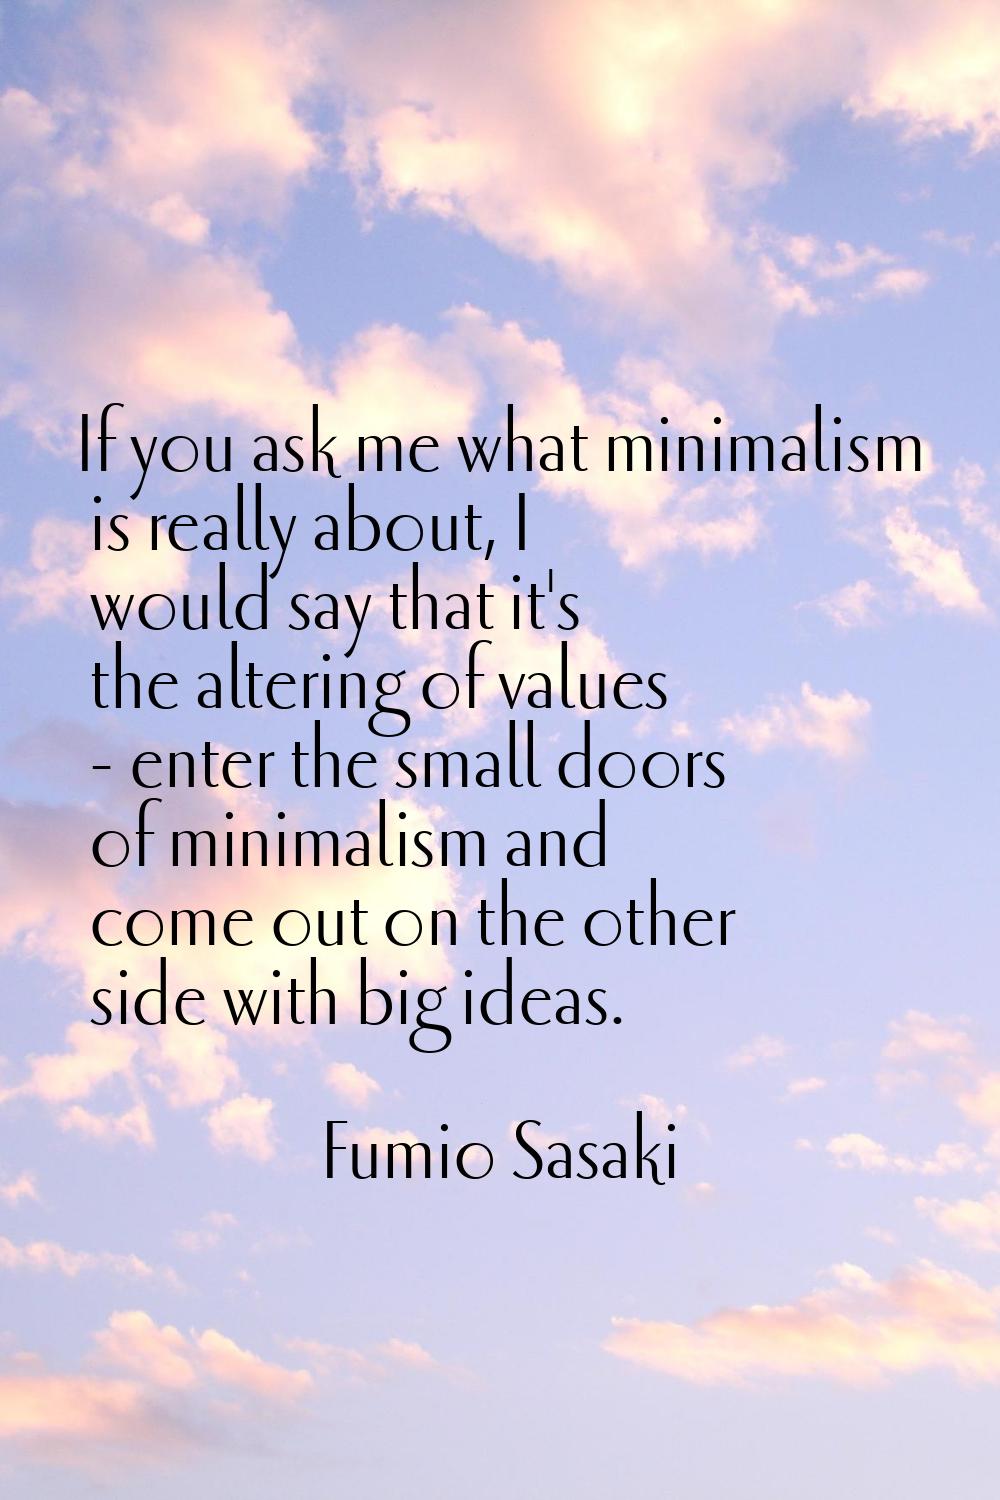 If you ask me what minimalism is really about, I would say that it's the altering of values - enter